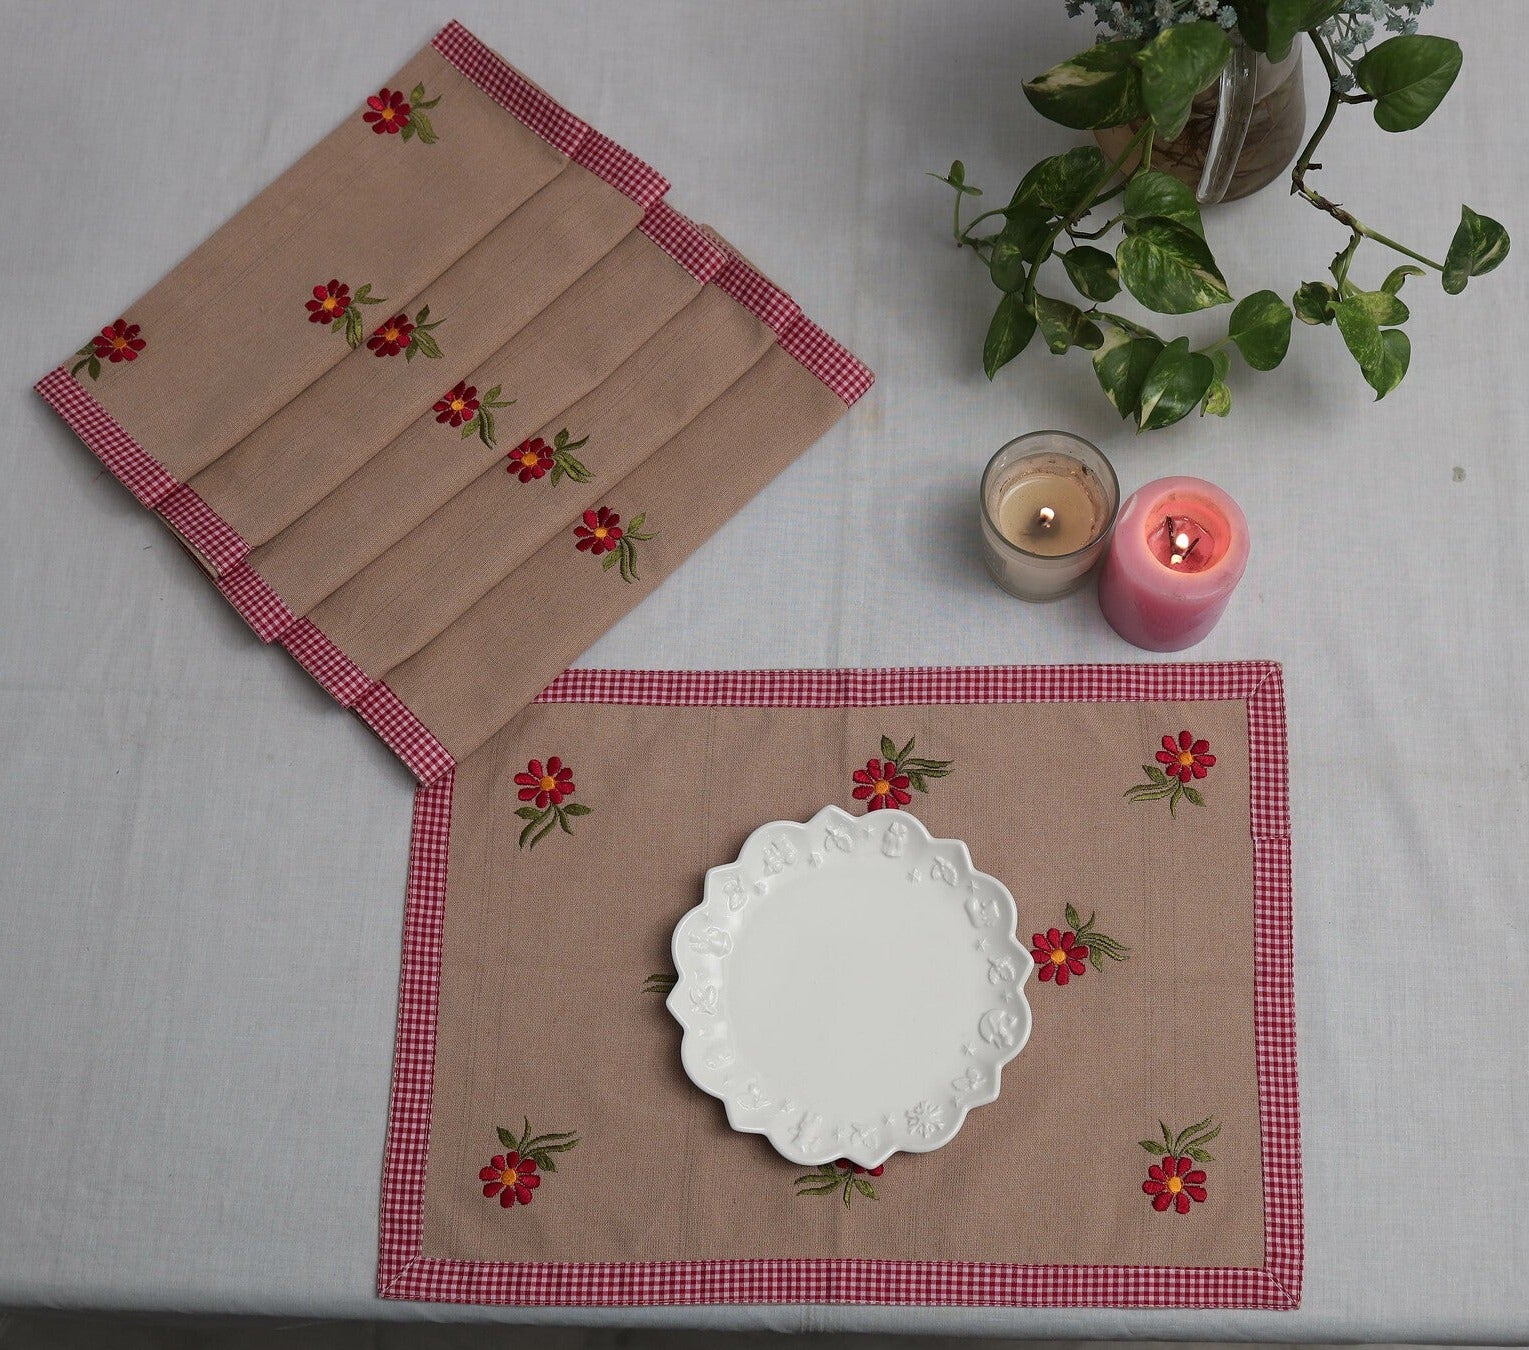 Set of 7 Beige and Red Table Mats & Runner with floral embroidery